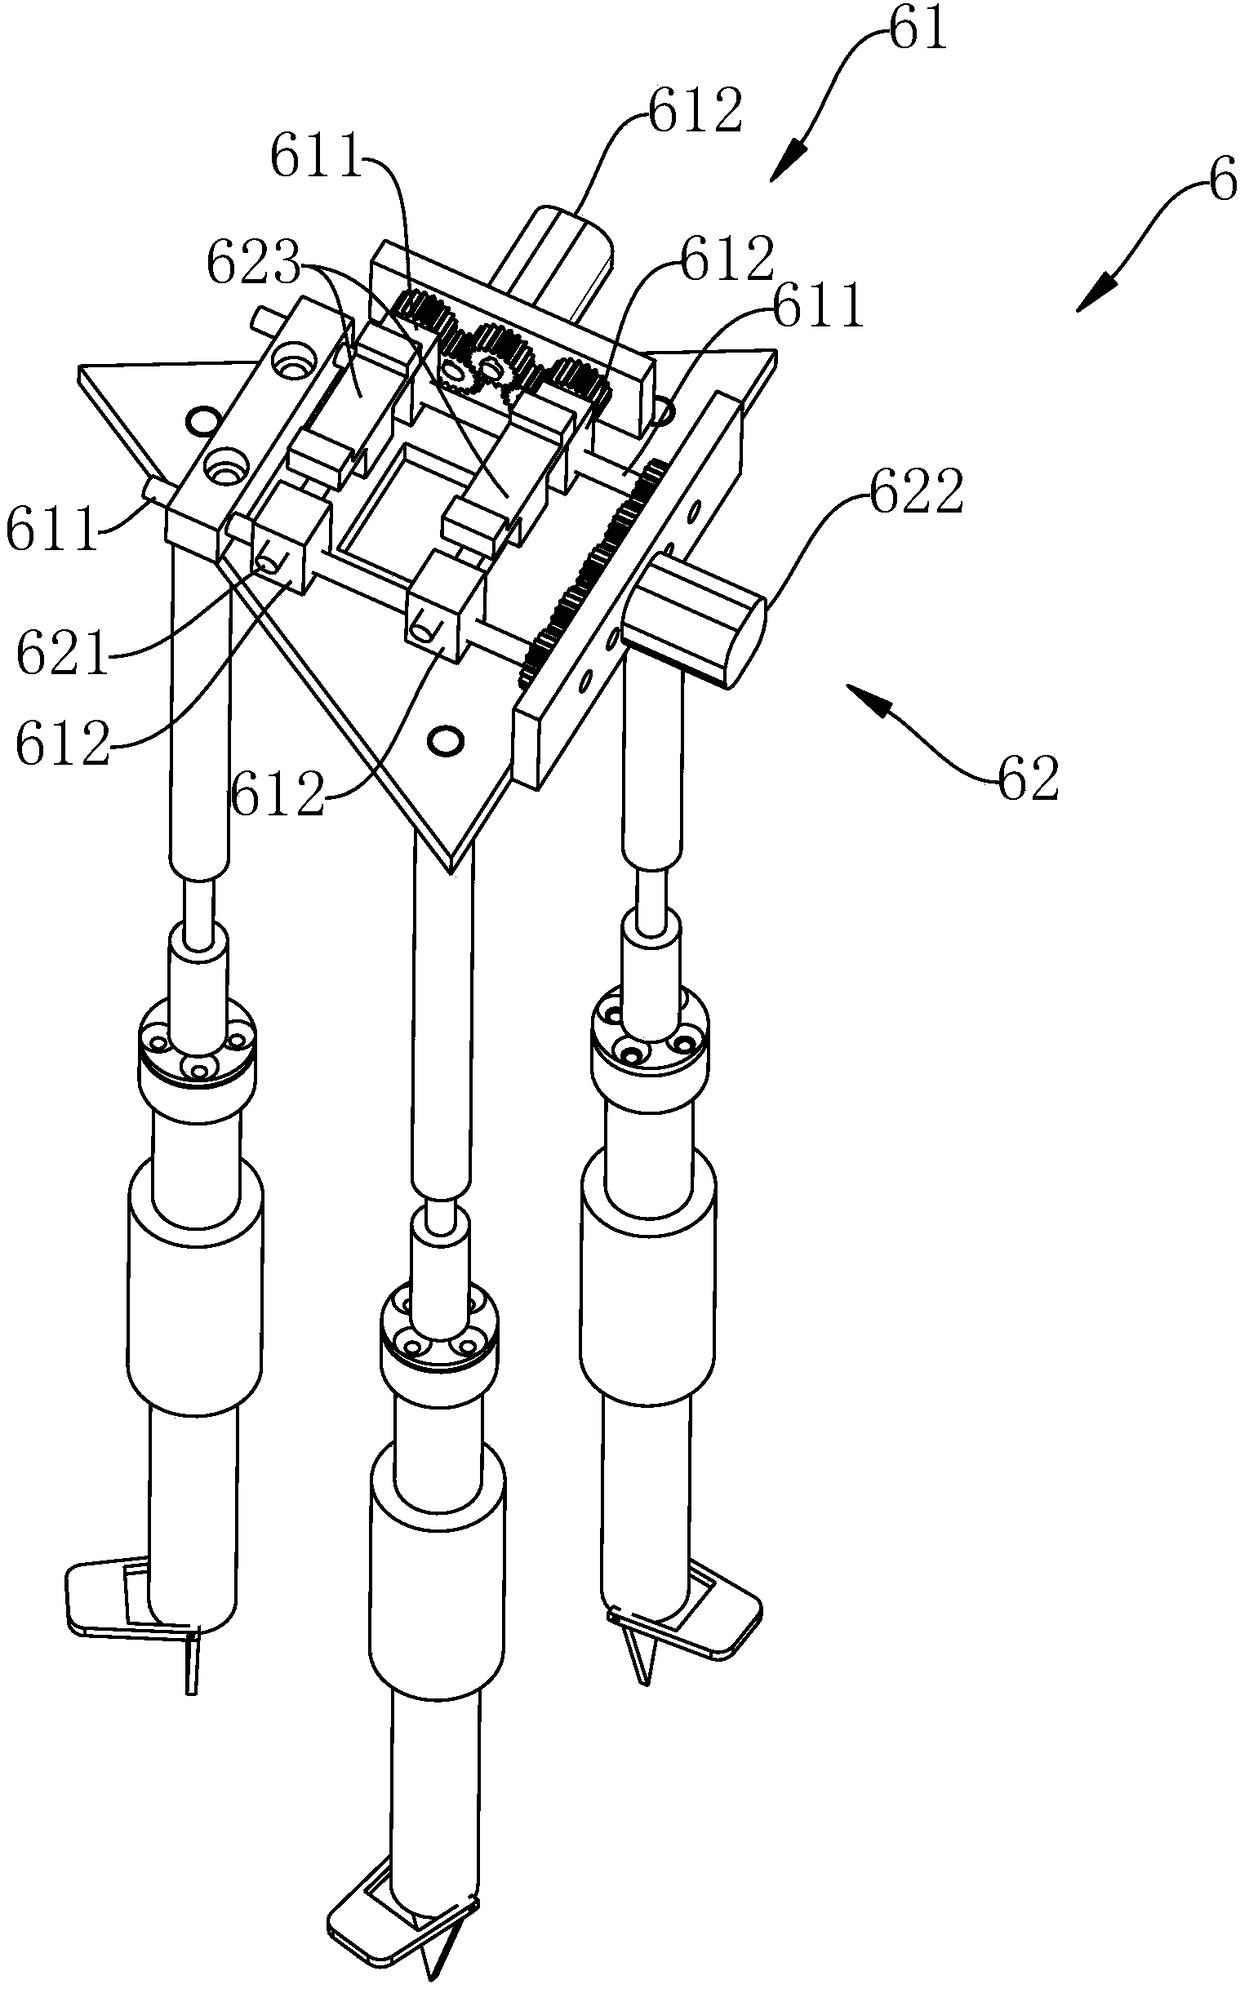 Automatic regulating device used for surveying and mapping equipment